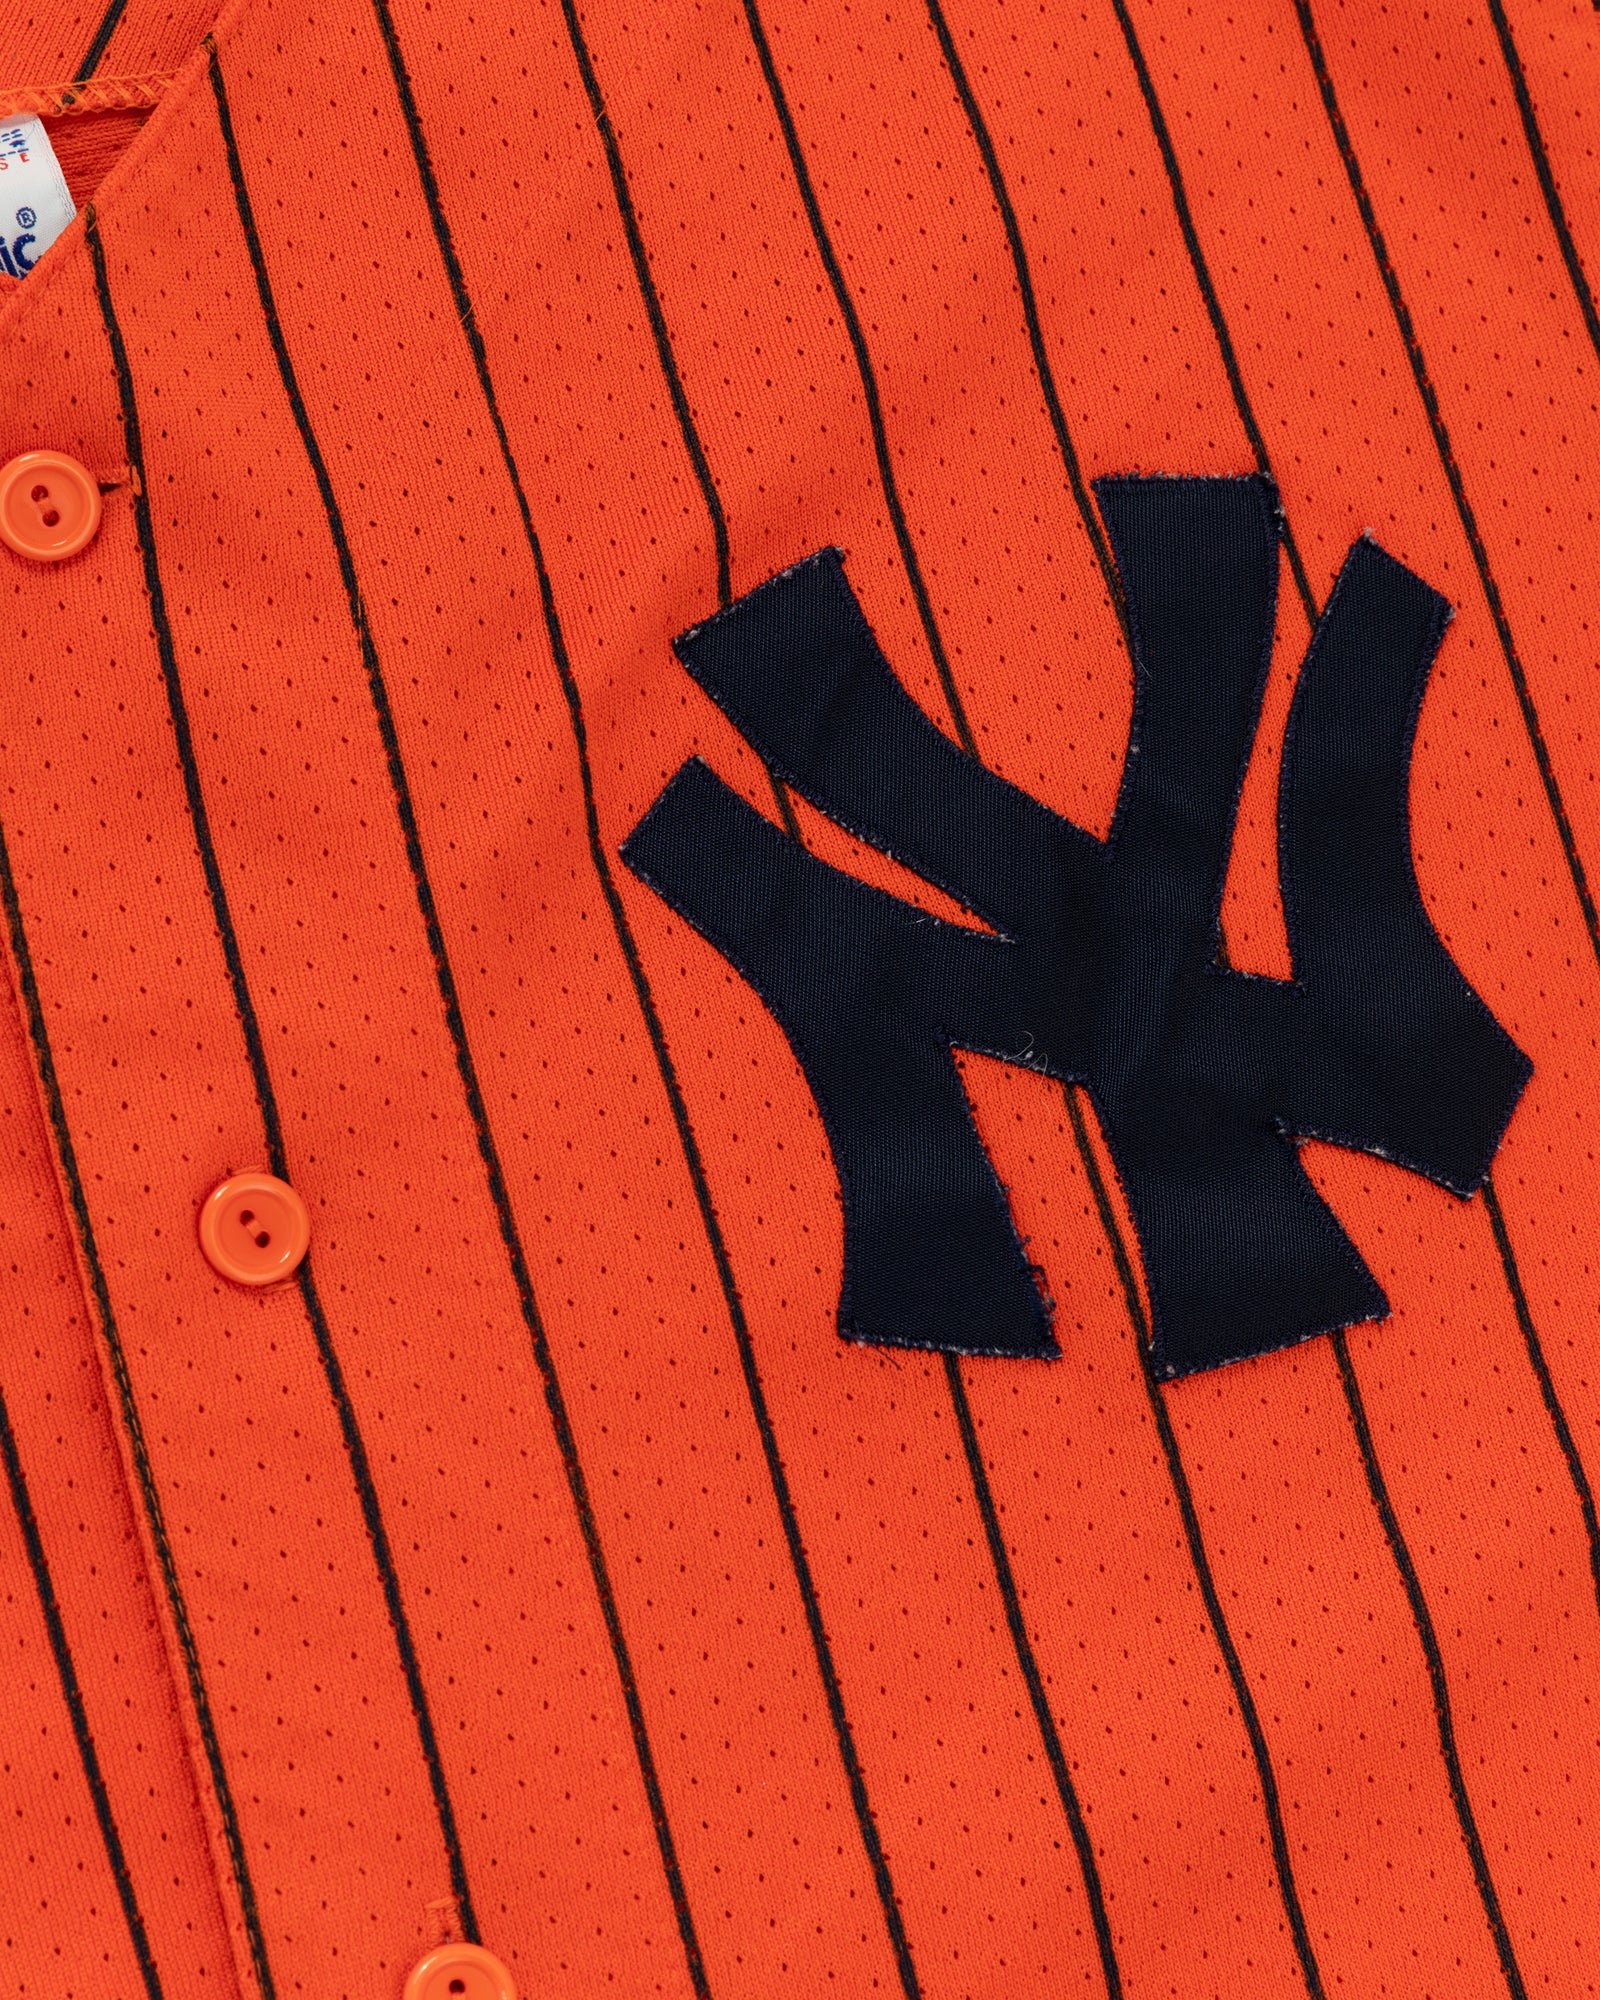 red new york yankees jersey